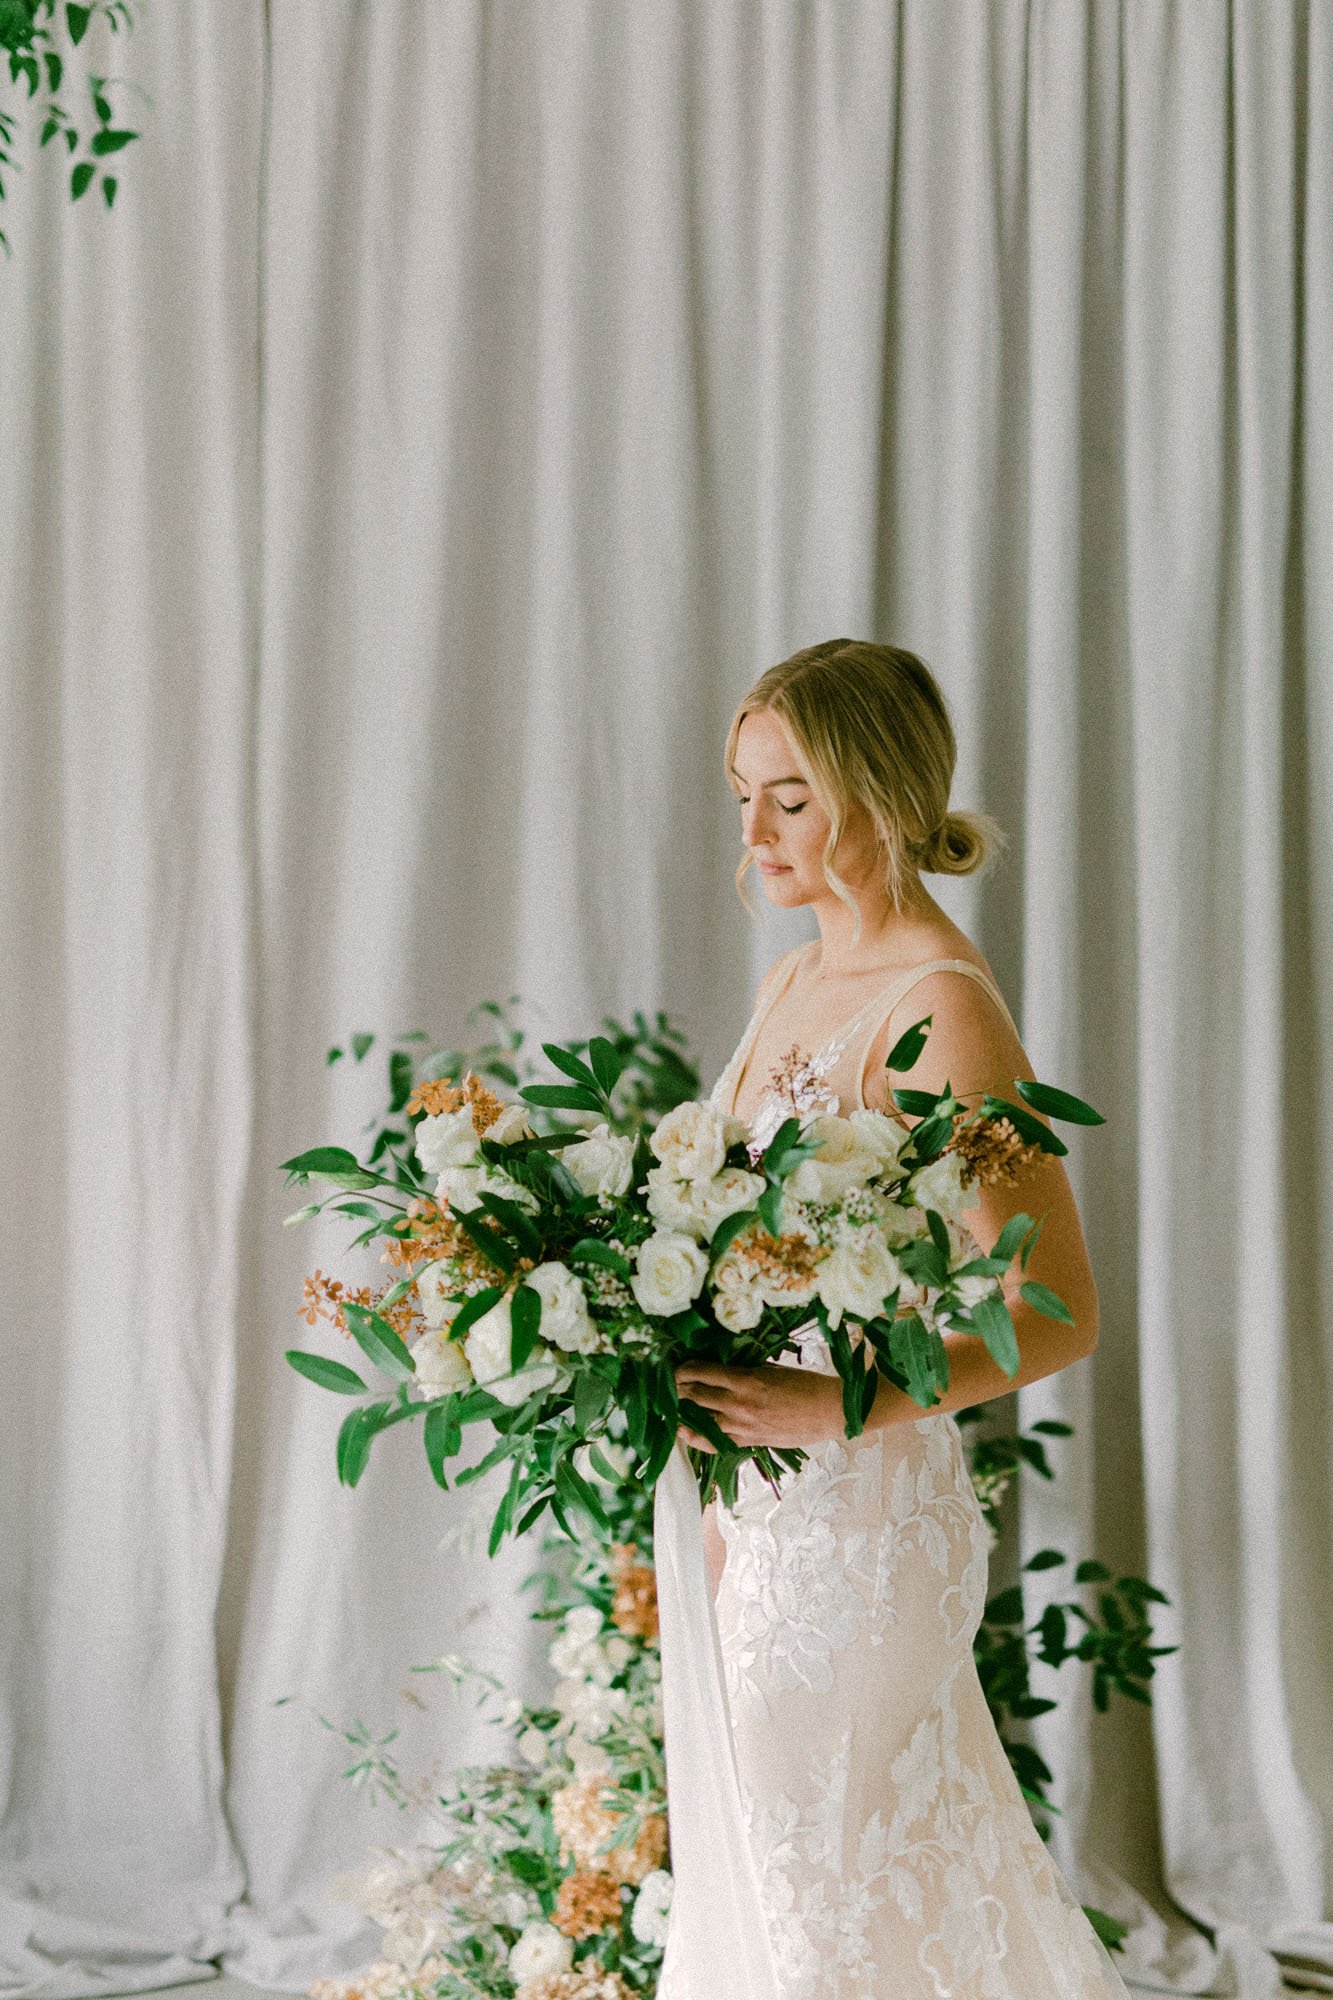  a bride wearing Elsie wedding dress by made with love bridal and holding a large organic bridal bouquet 